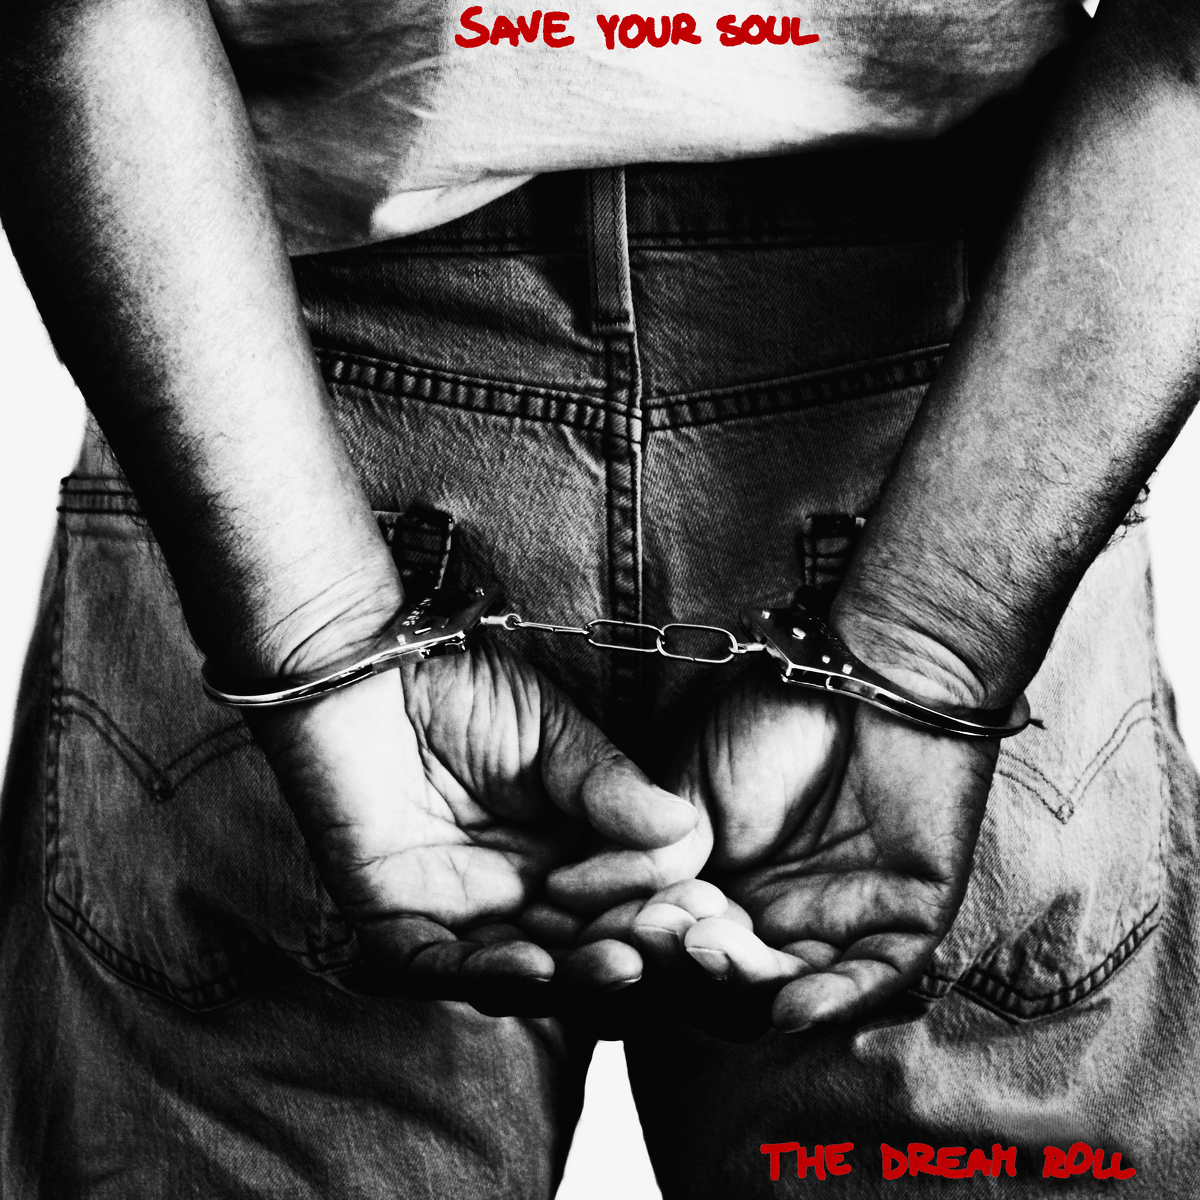 Rock ‘n Roll Is Making A Comeback with The Dream Roll’s Save Your Soul EP 1